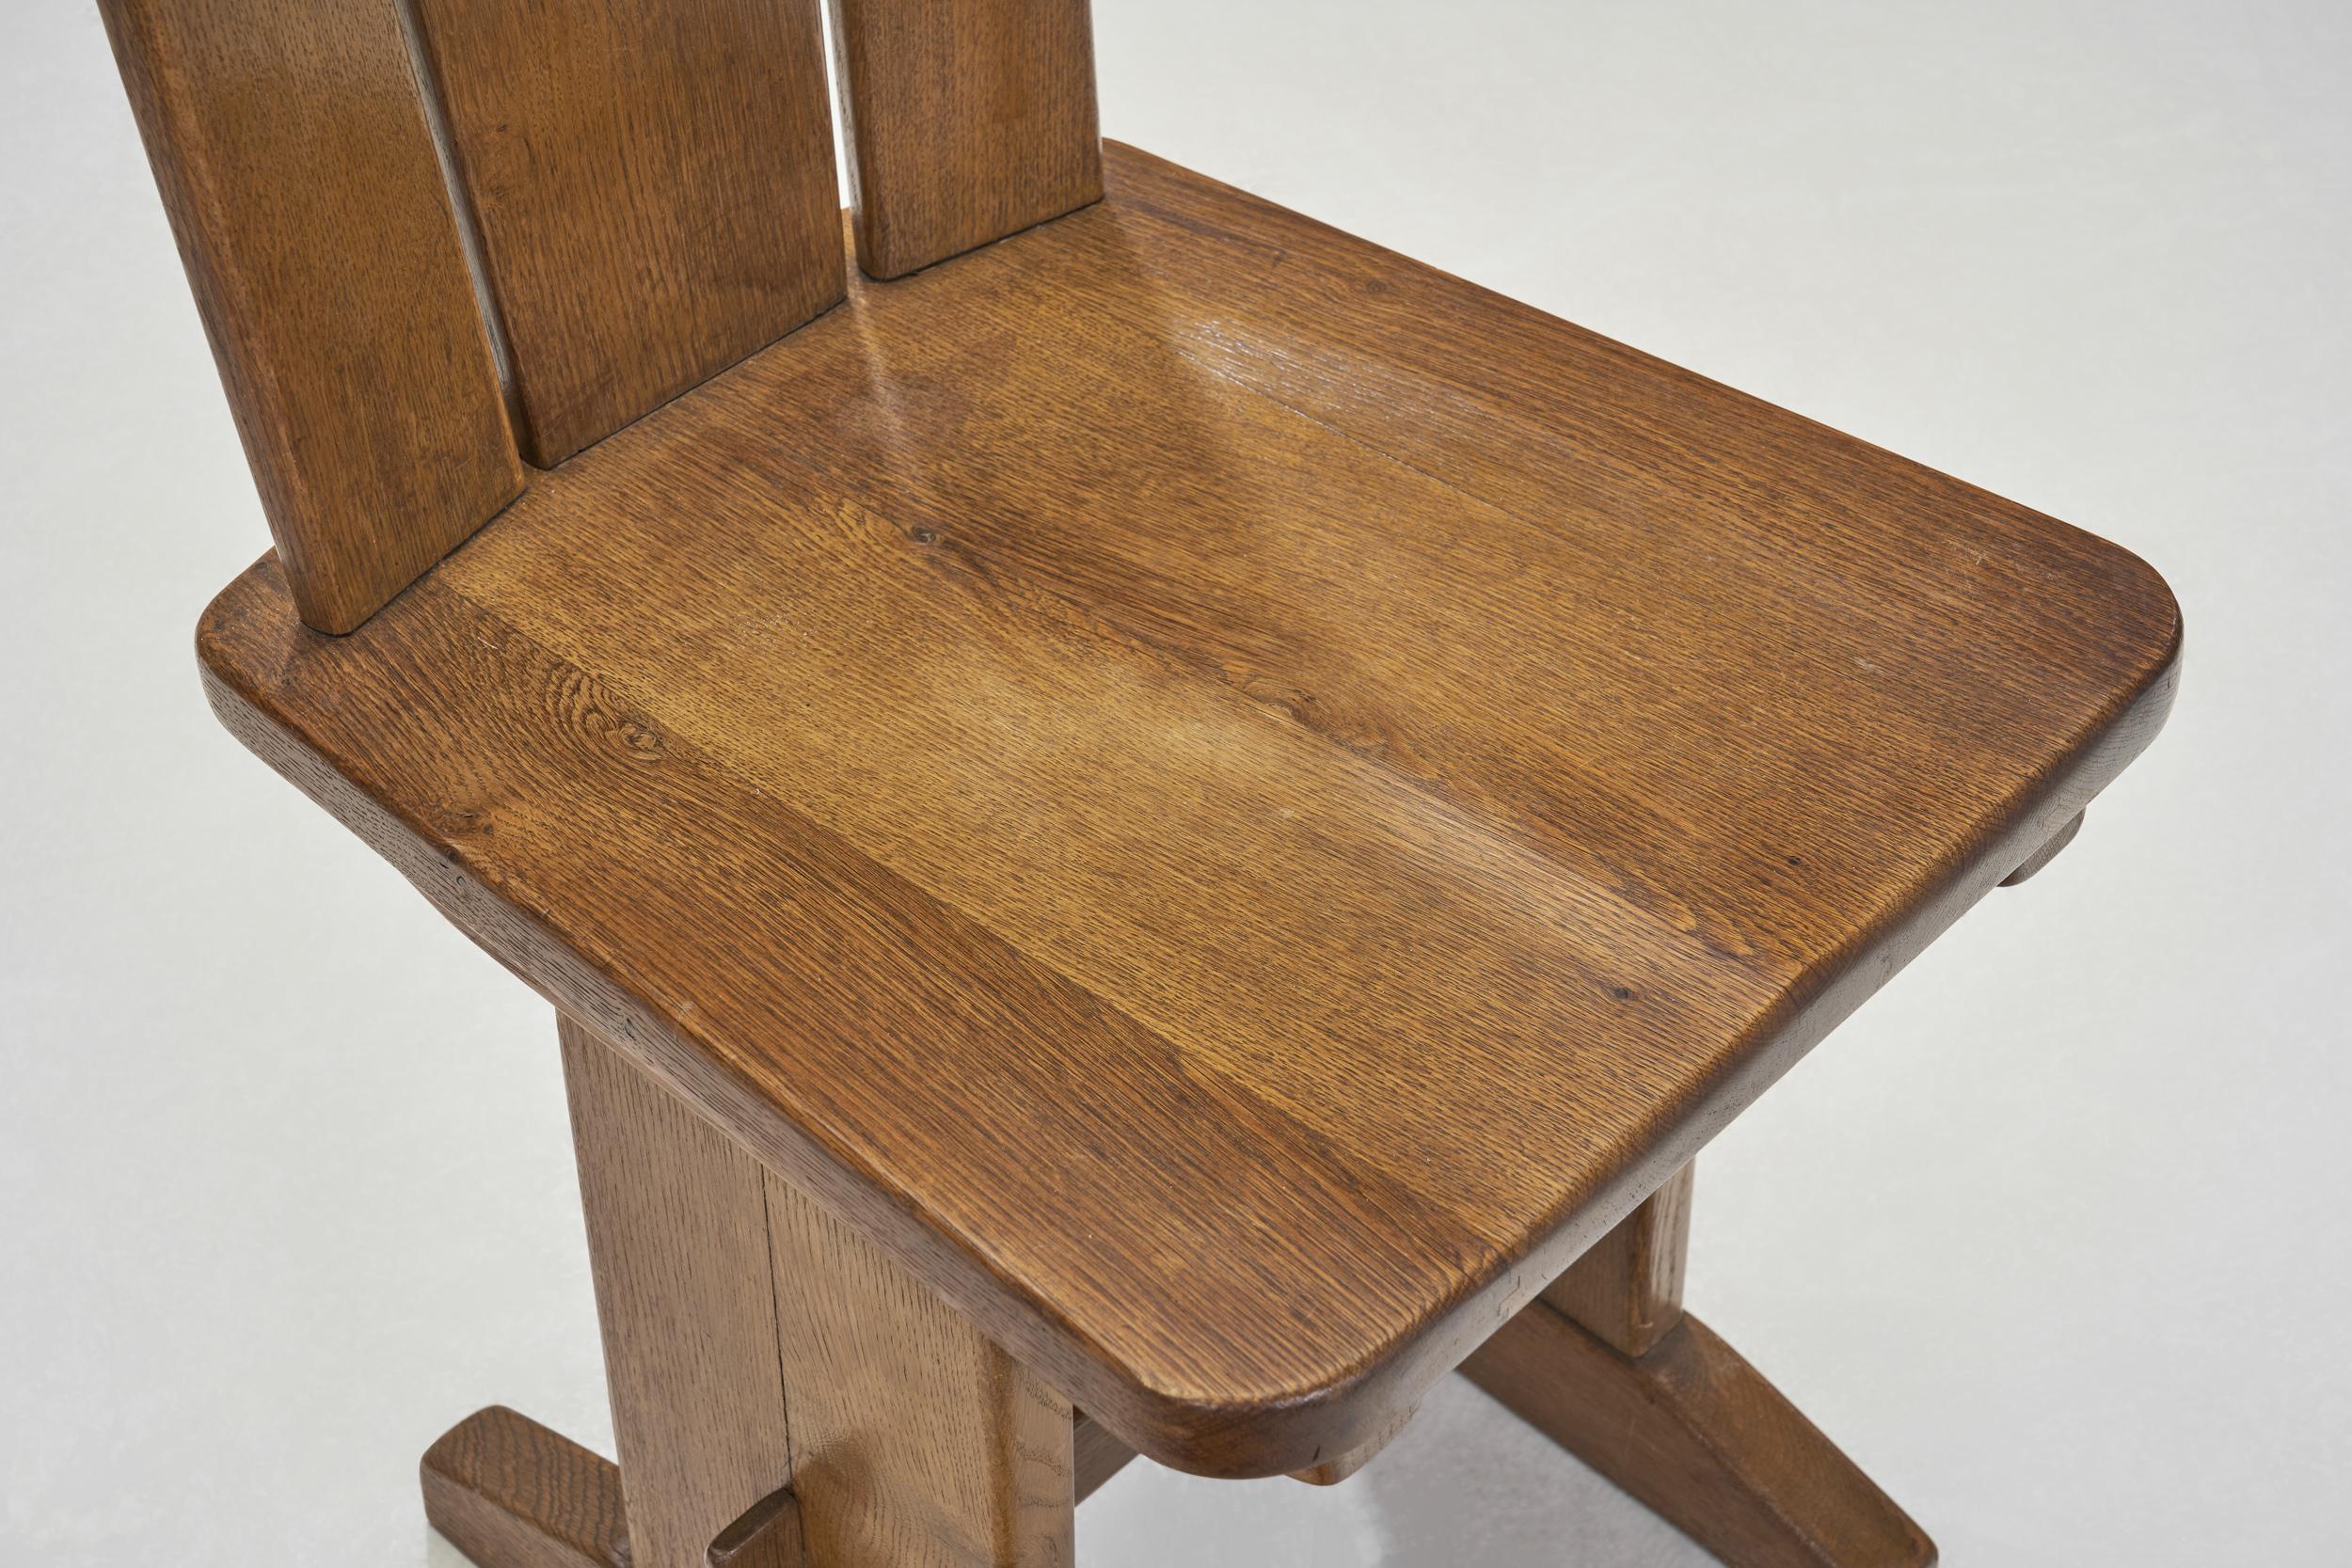 Set of Five Brutalist Solid Oak Dining Chairs, Europe 1970s For Sale 2